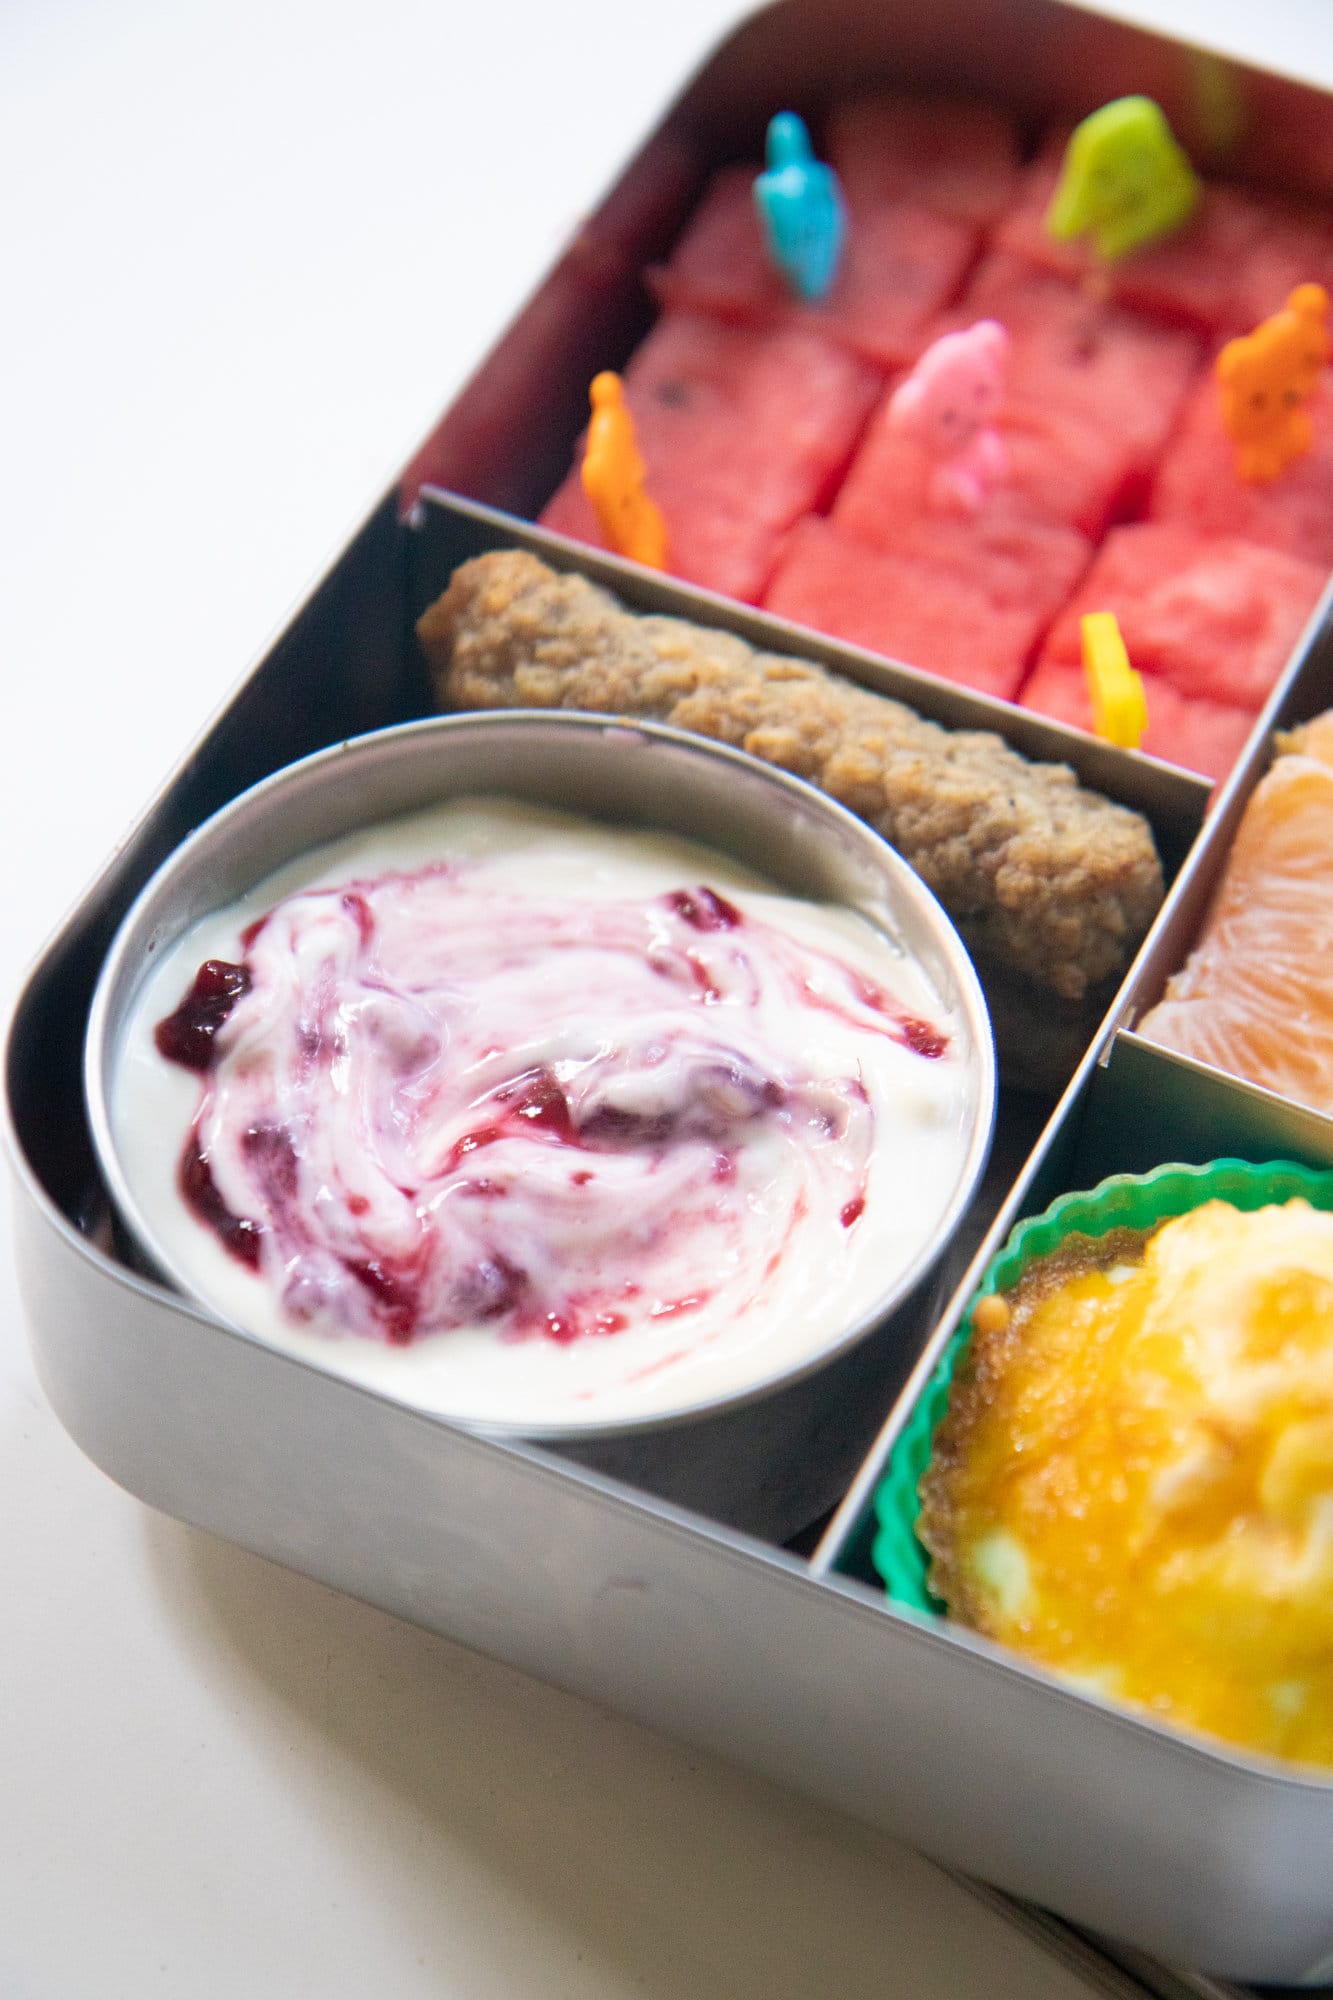 Metal bento-style lunchbox with a cup of yogurt, fruit, and other breakfast items.